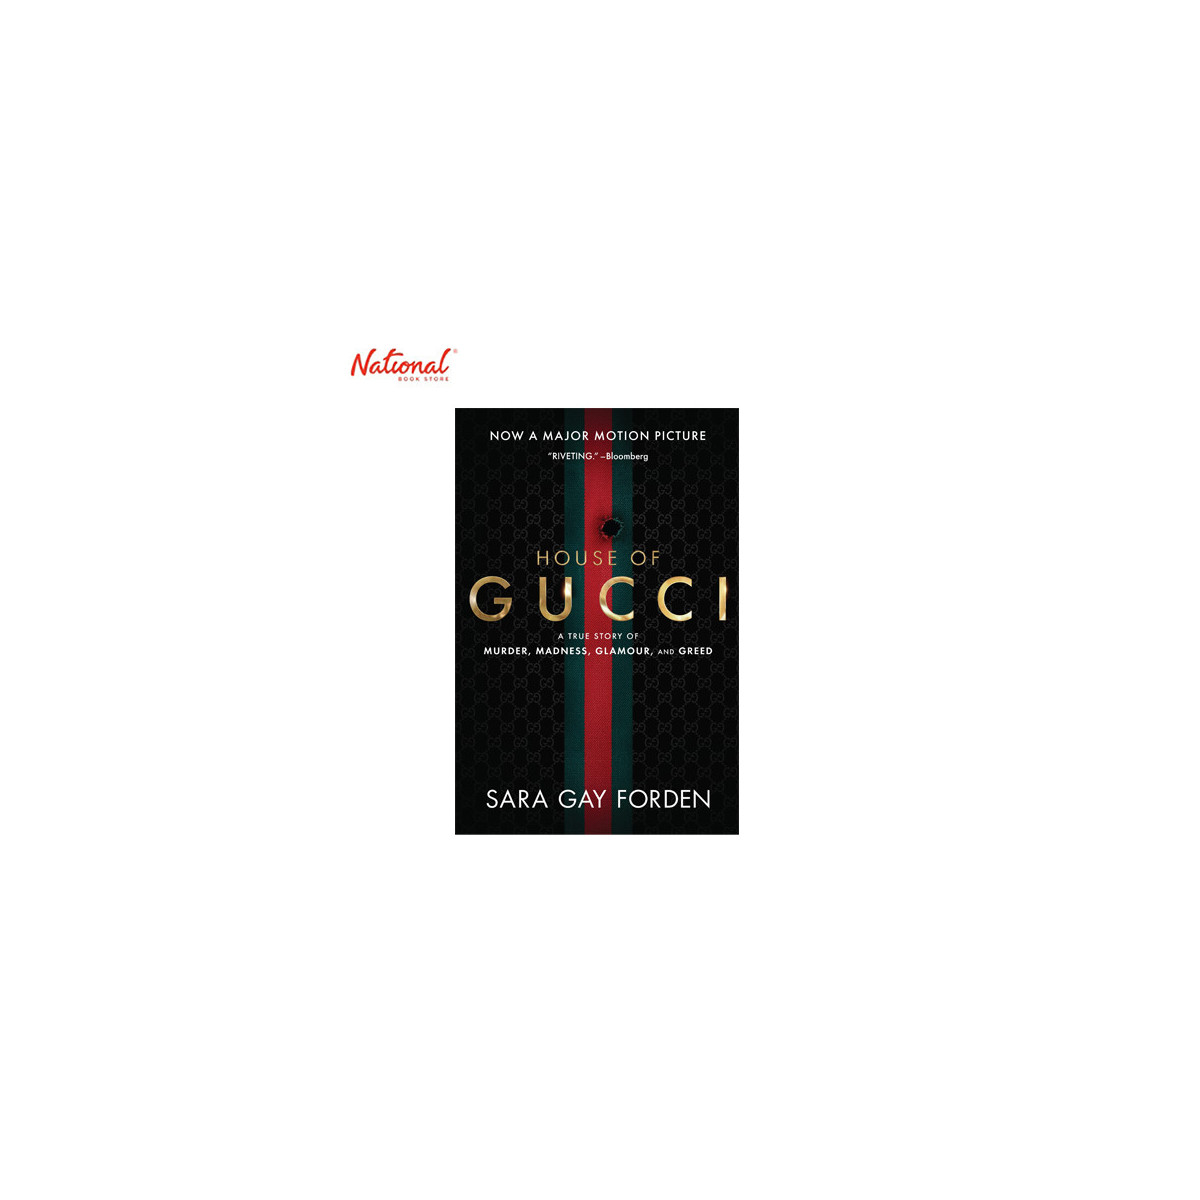 The House of Gucci (Movie Tie-in) Trade Paperback by Sara Gay Forden